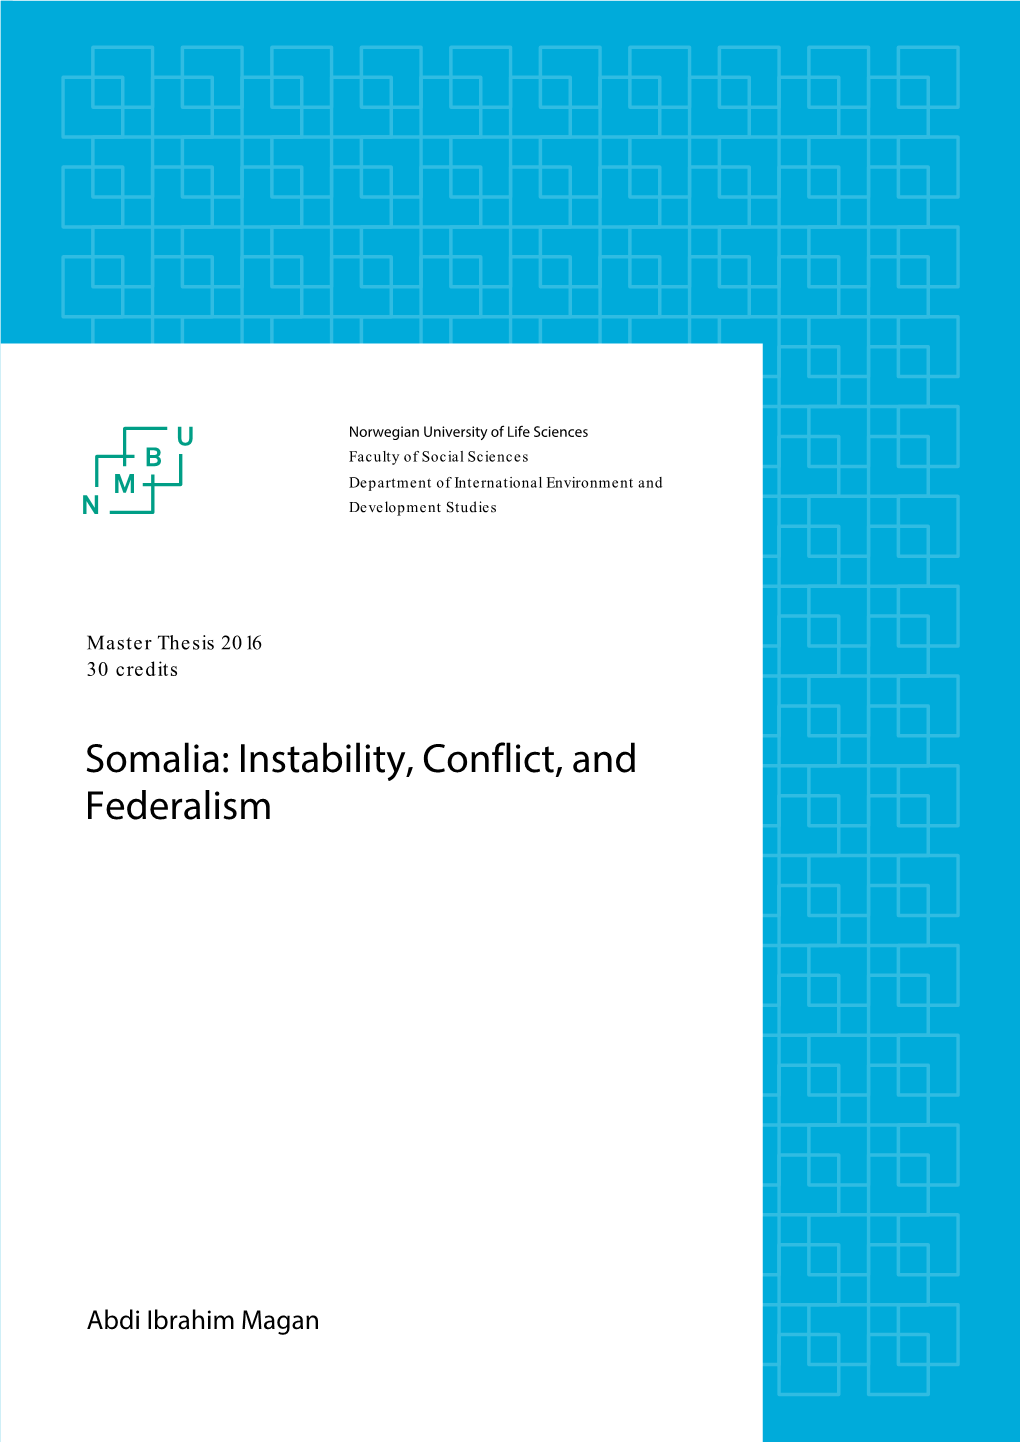 Somalia: Instability, Conflict, and Federalism